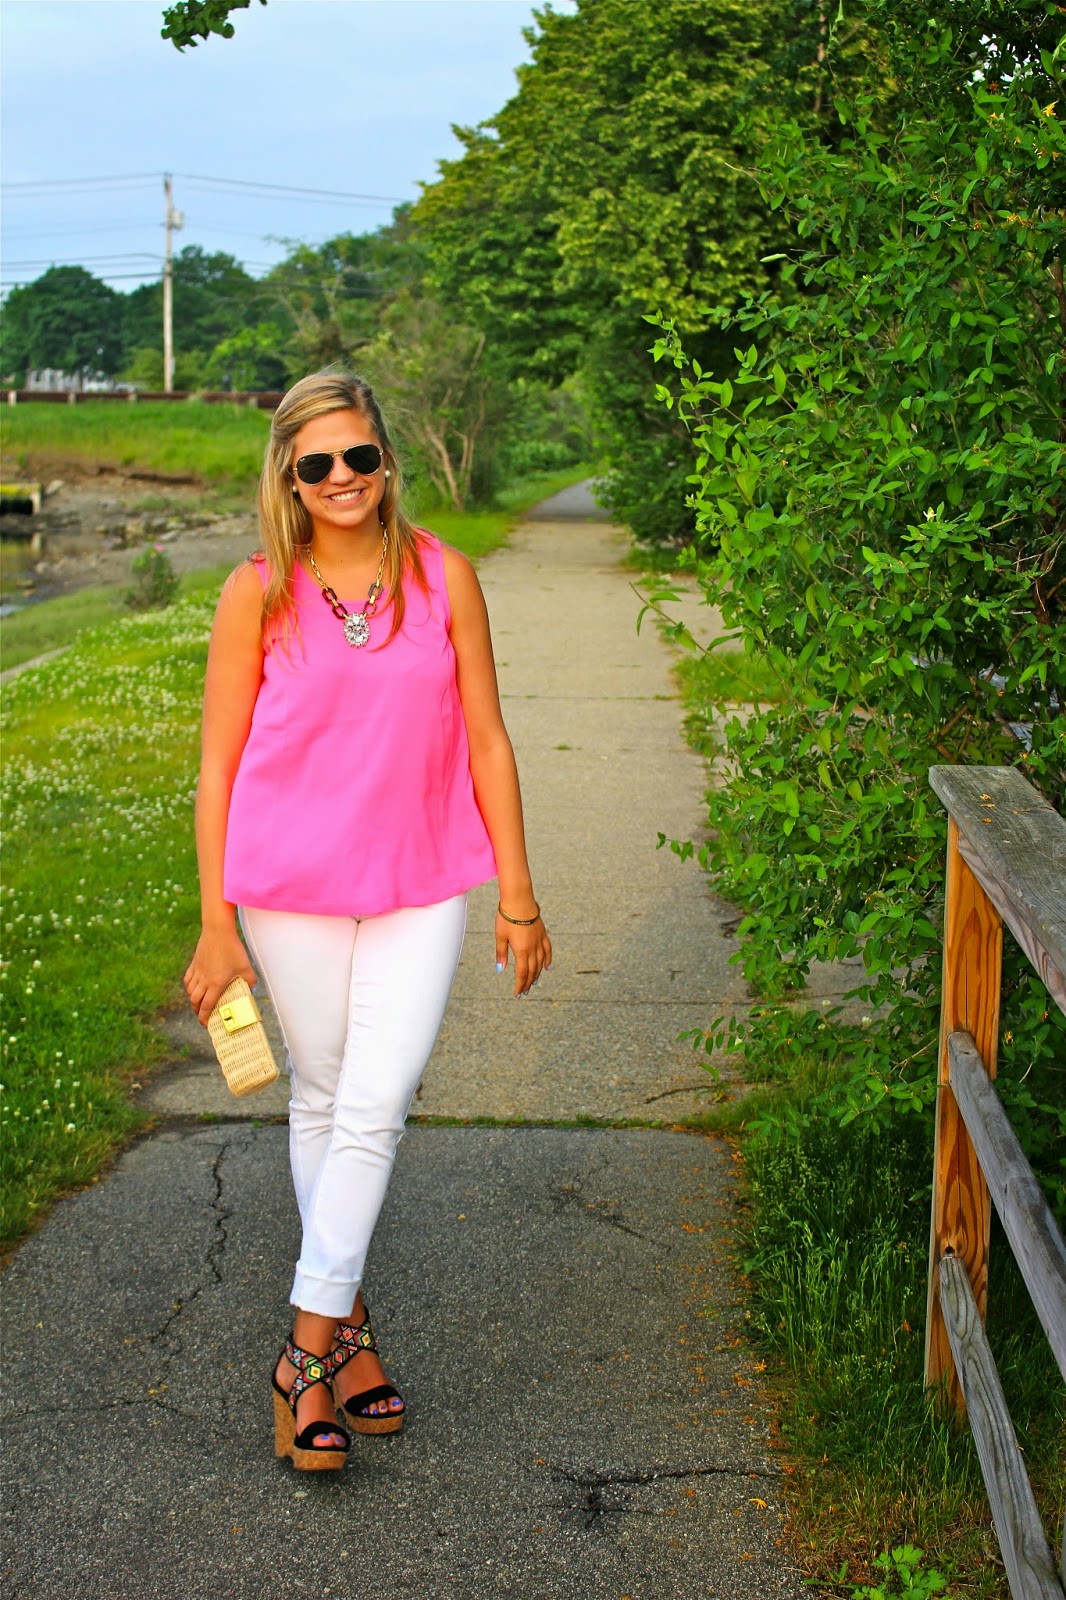 Style Cubby - Fashion and Lifestyle Blog Based in New England: Outfit ...